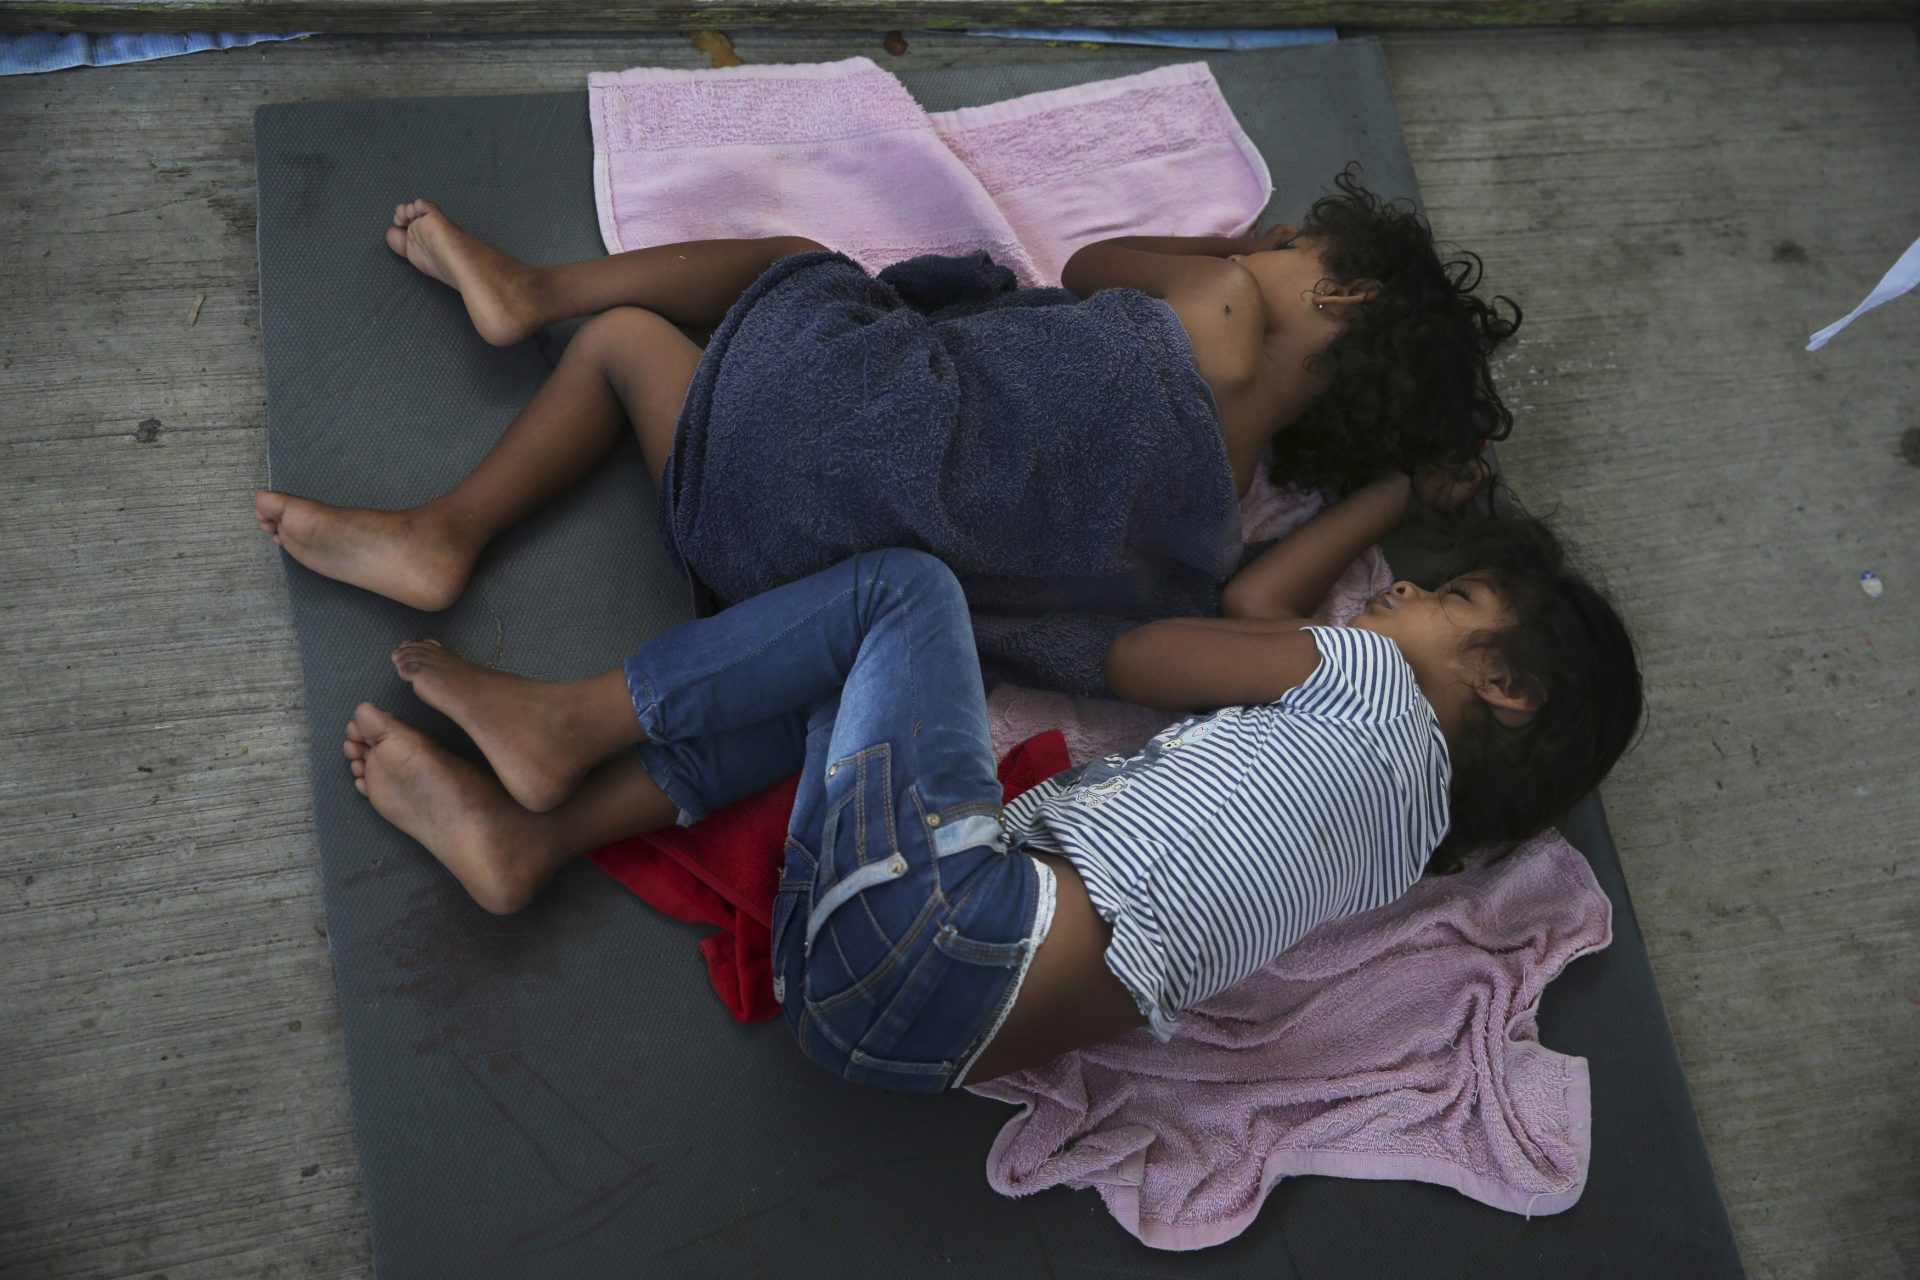 FILE PHOTO: In this July 17, 2019 file photo, migrant children sleep on a mattress on the floor of the AMAR migrant shelter in Nuevo Laredo, Mexico.